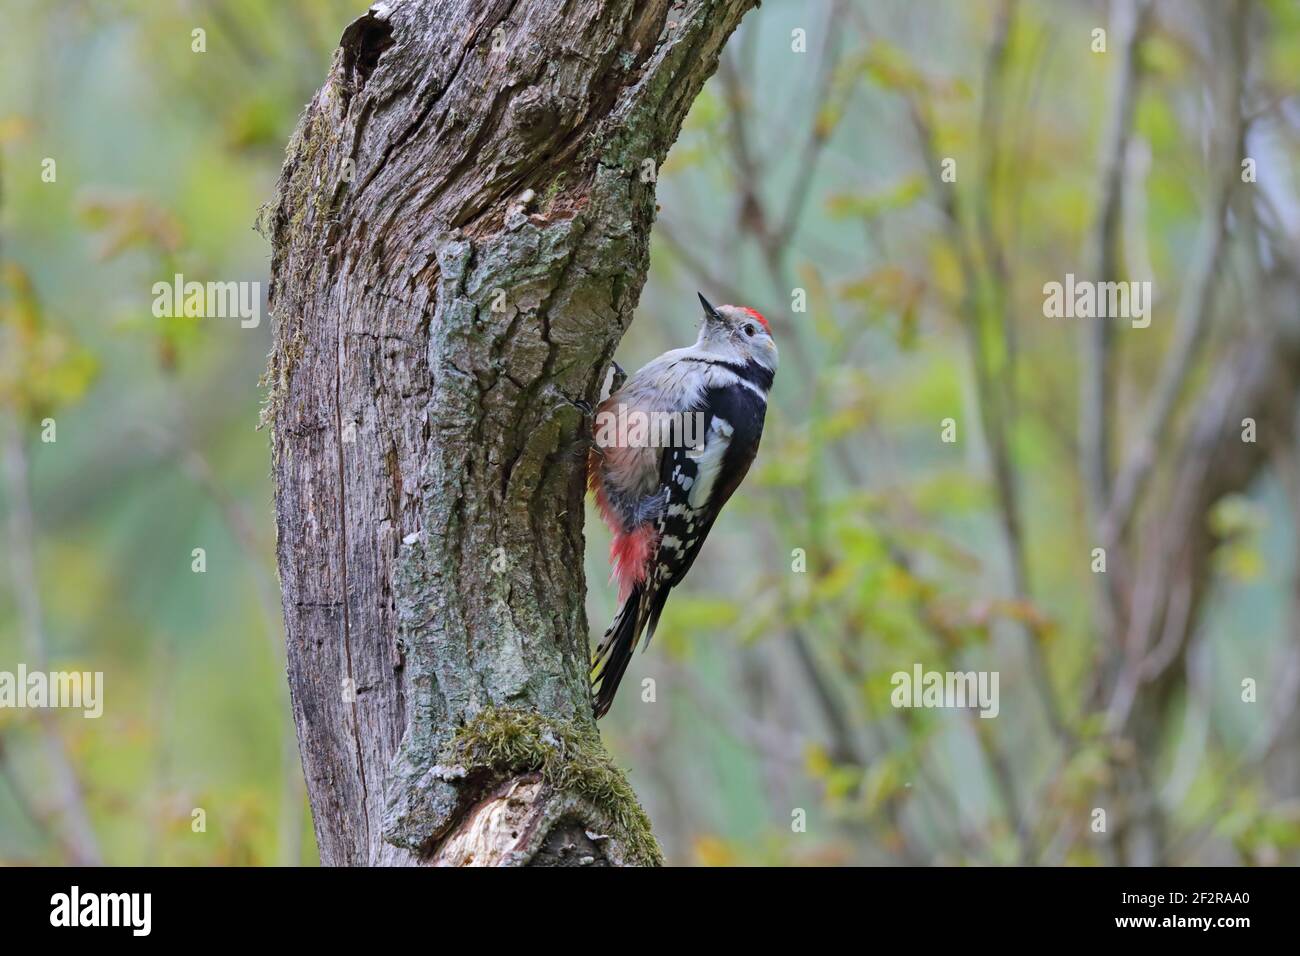 An adult female Middle spotted Woodpecker (Dendrocoptes medius) perched on a tree trunk near a nest site in the Bialowieza forest, Poland Stock Photo